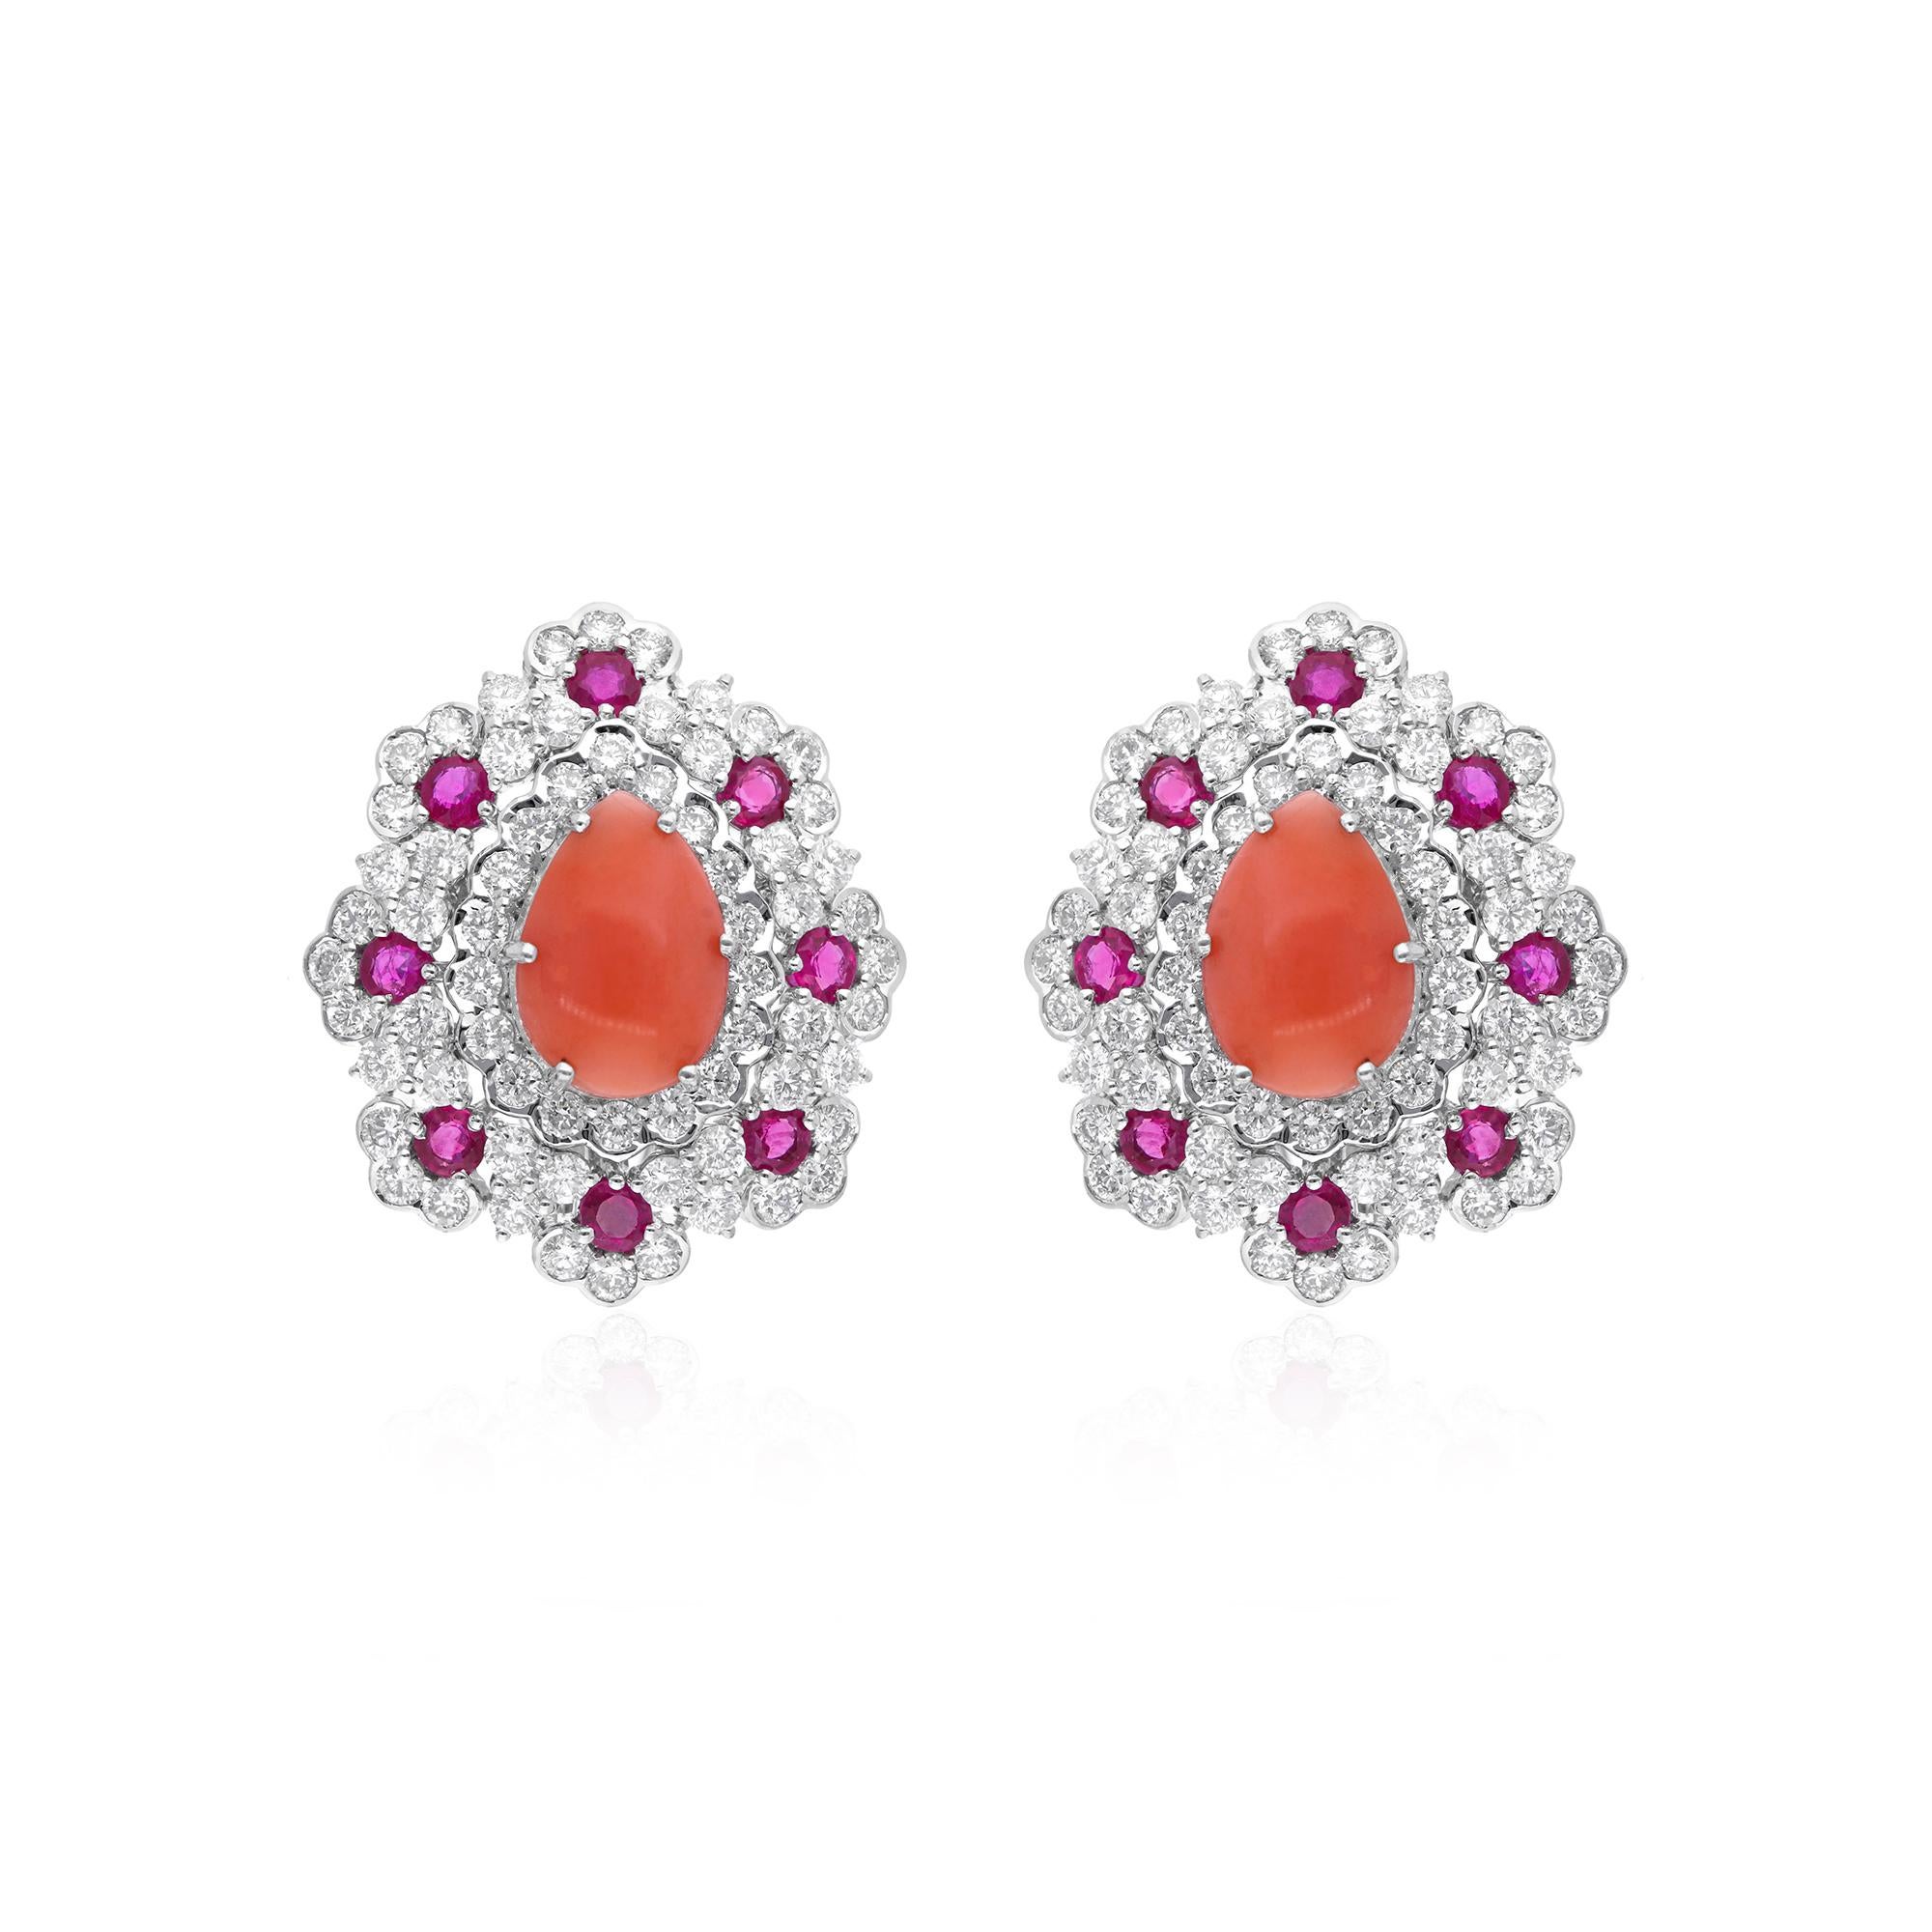 Set in the finest 14 karat white gold, these studs are a testament to luxury craftsmanship. The brilliance of the coral gemstones is accentuated by the surrounding array of dazzling rubies and diamonds. Each precious stone is carefully selected and